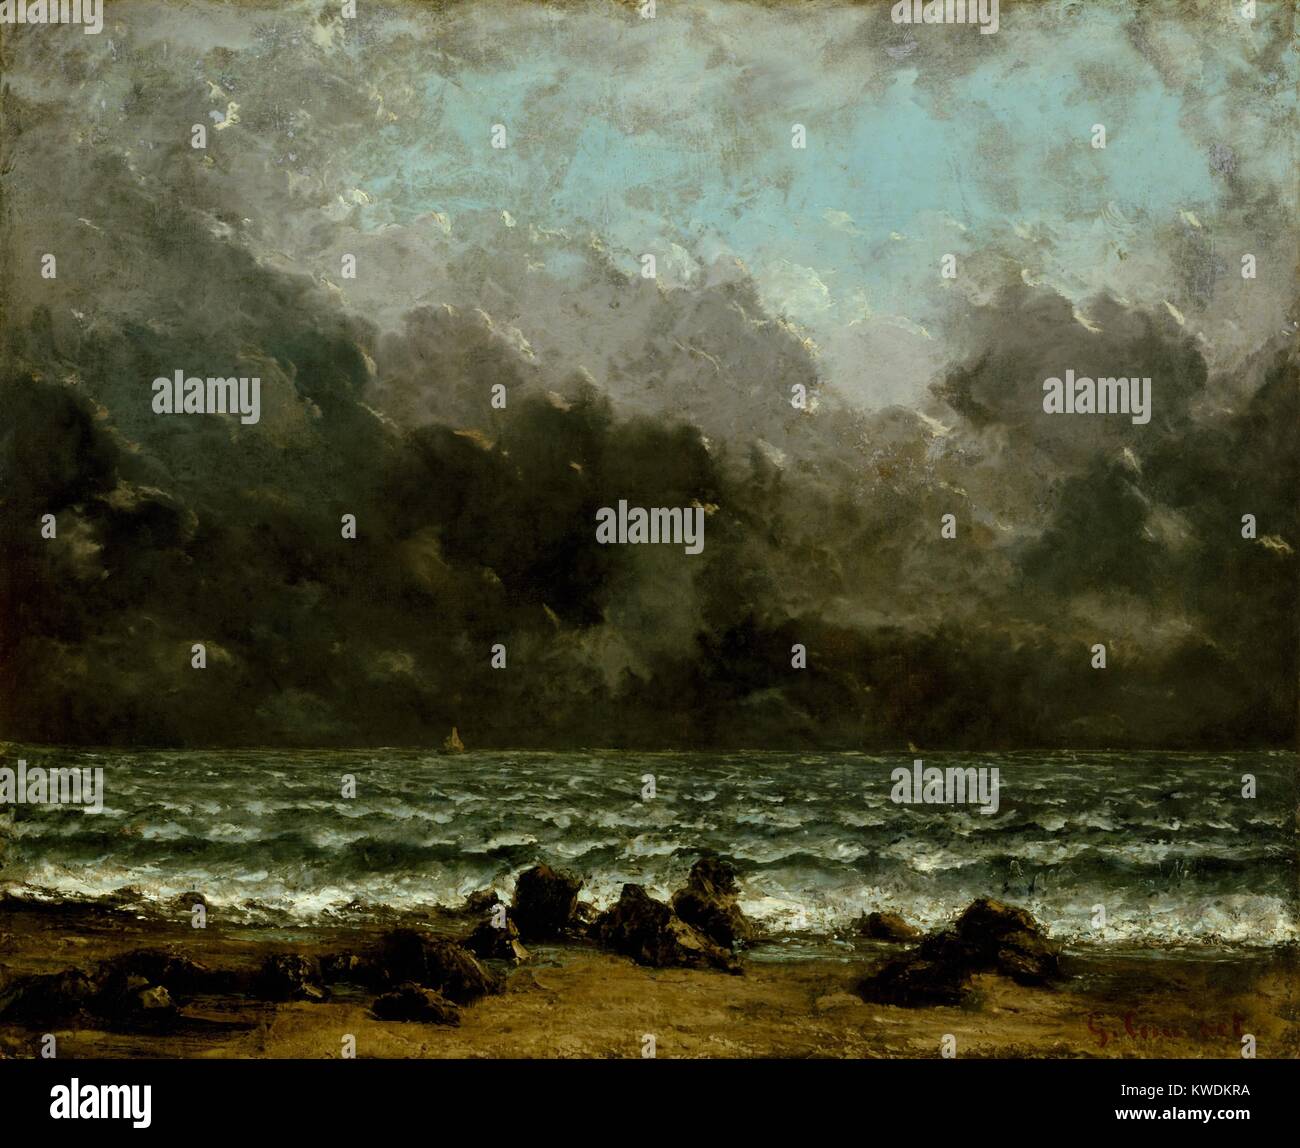 THE SEA, by Gustave Courbet, 1865, French painting, oil on canvas. Courbet created seascapes painted en plein air and in the studio, all based on his visual experience of various light and weather (BSLOC 2017 9 121) Stock Photo